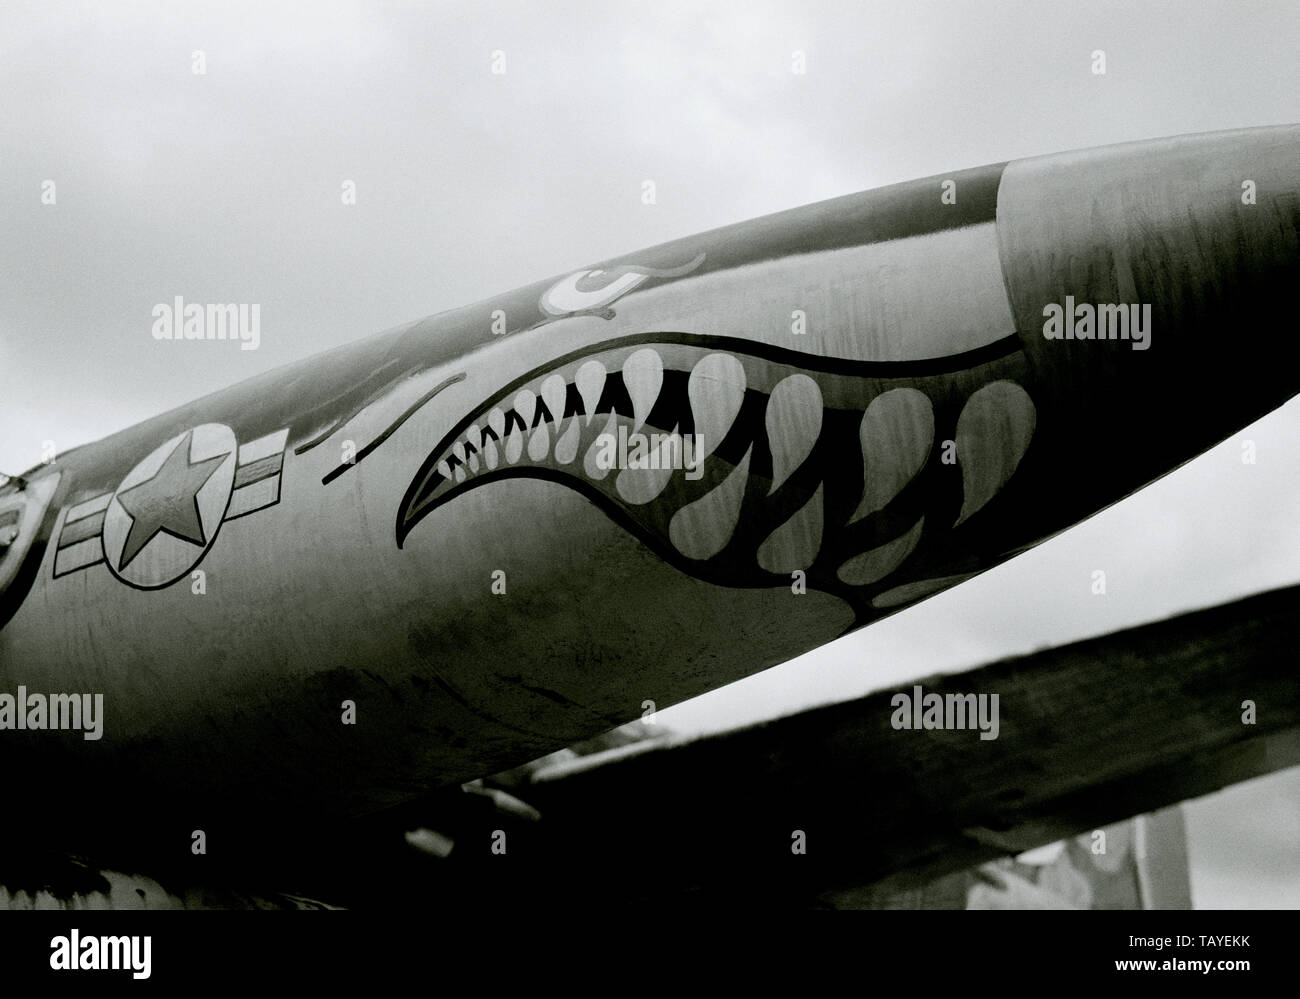 Sharks mouth American WW2-era bomber missile. World War Two 2 Retro Weapon Weaponry Flying Tigers Stock Photo